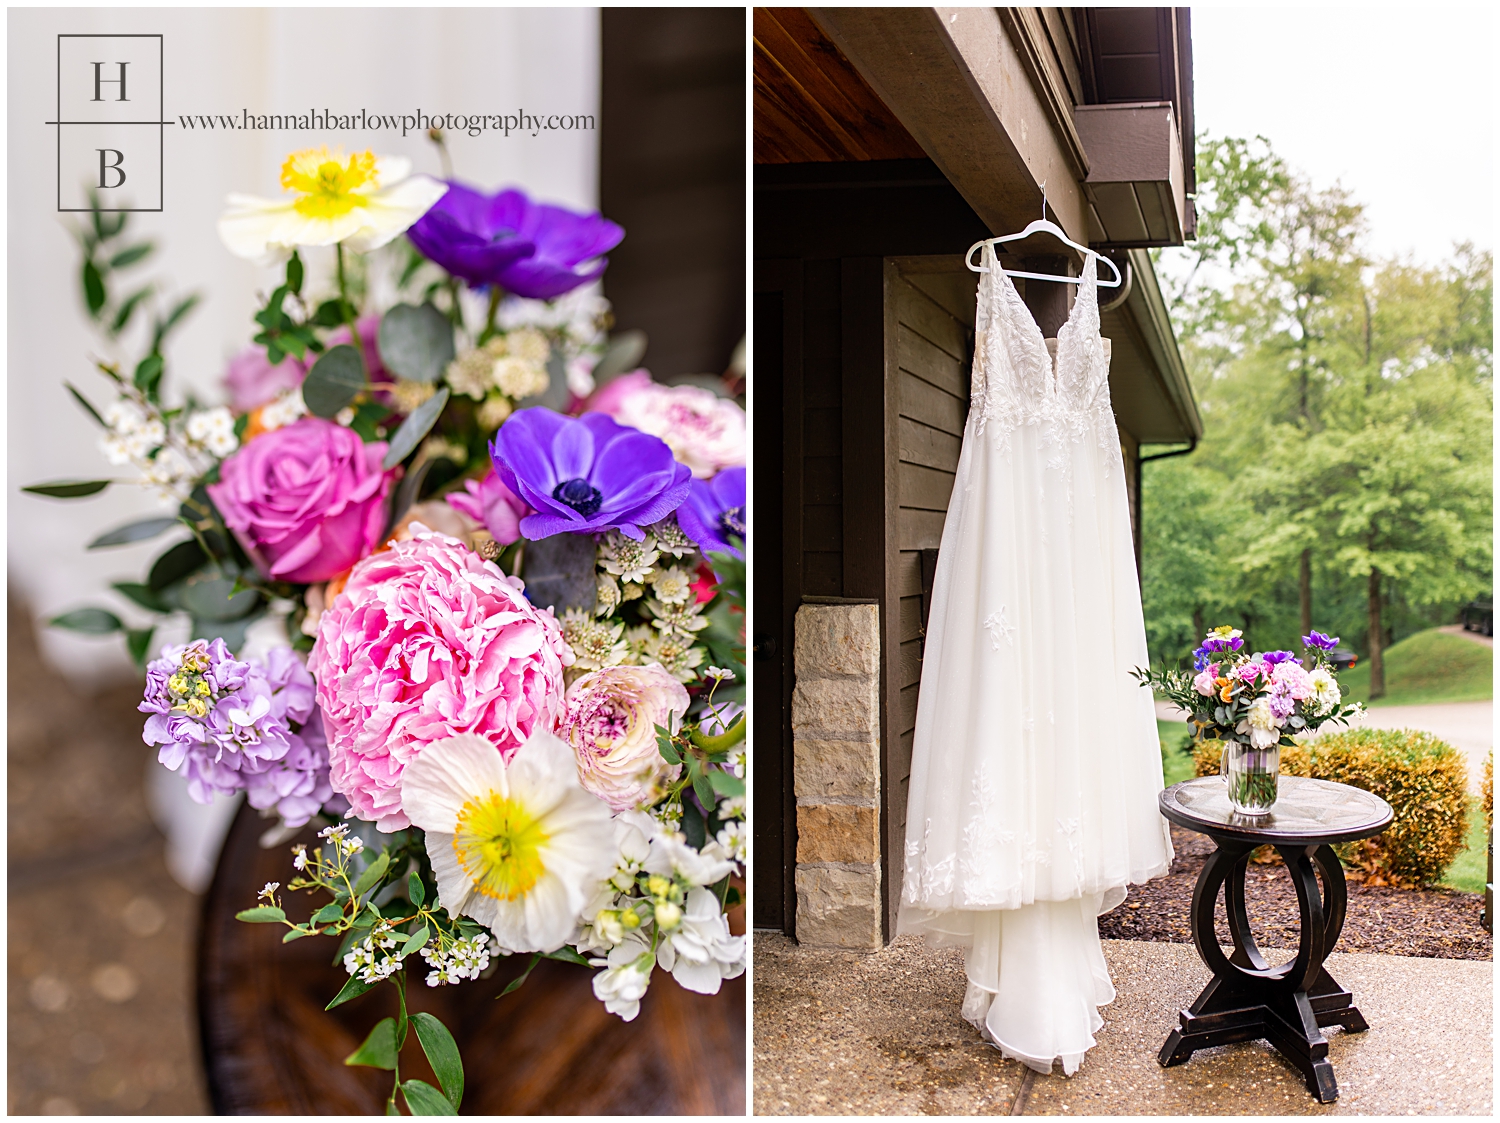 Photos of wedding dress hanging from cabin with bouquet sitting on table next to it.